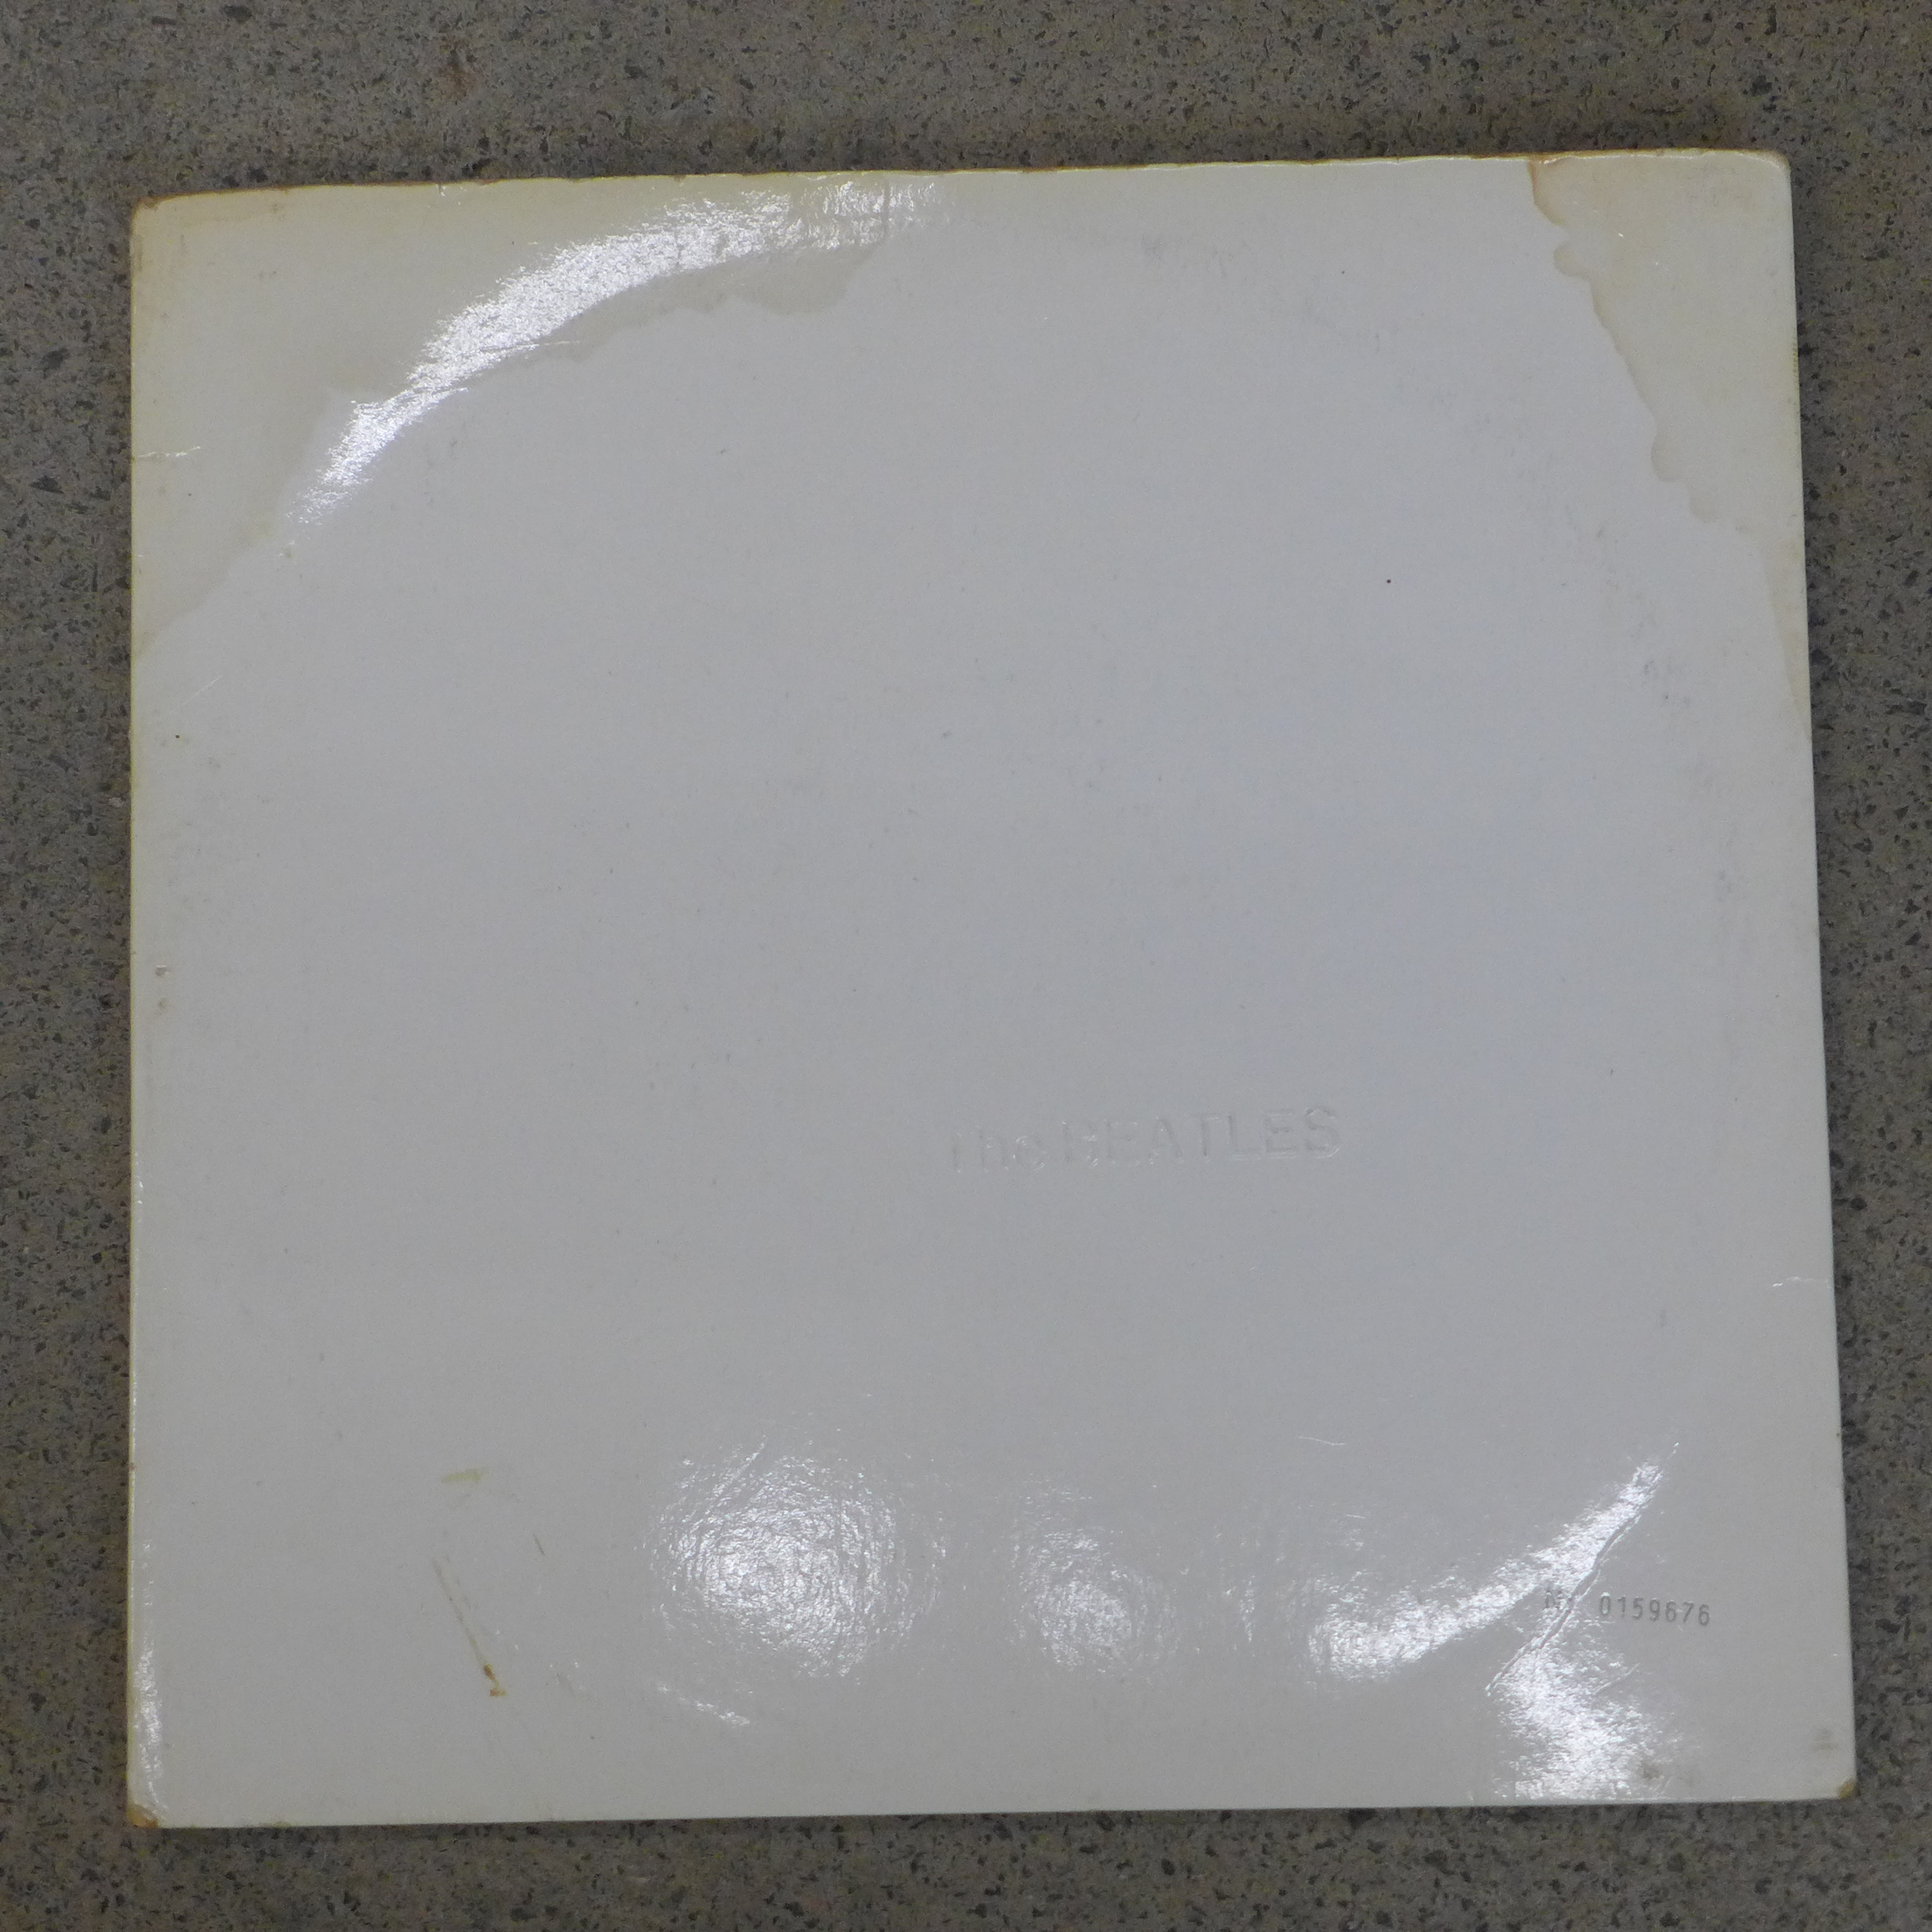 The Beatles White Album, top opener with poster and portrait photos, number 0159676